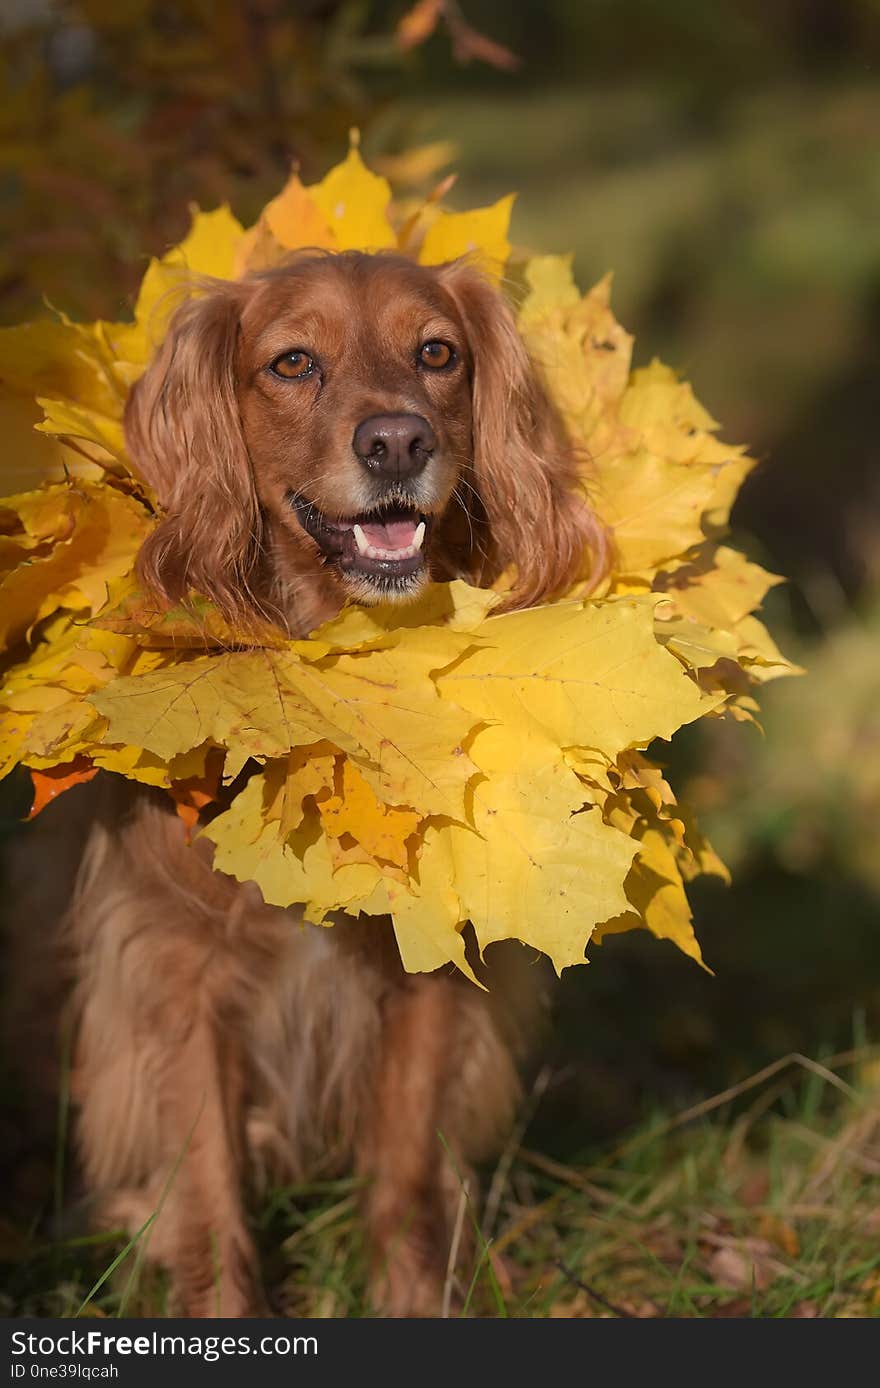 Red english spaniel with a wreath of autumn leaves around his neck